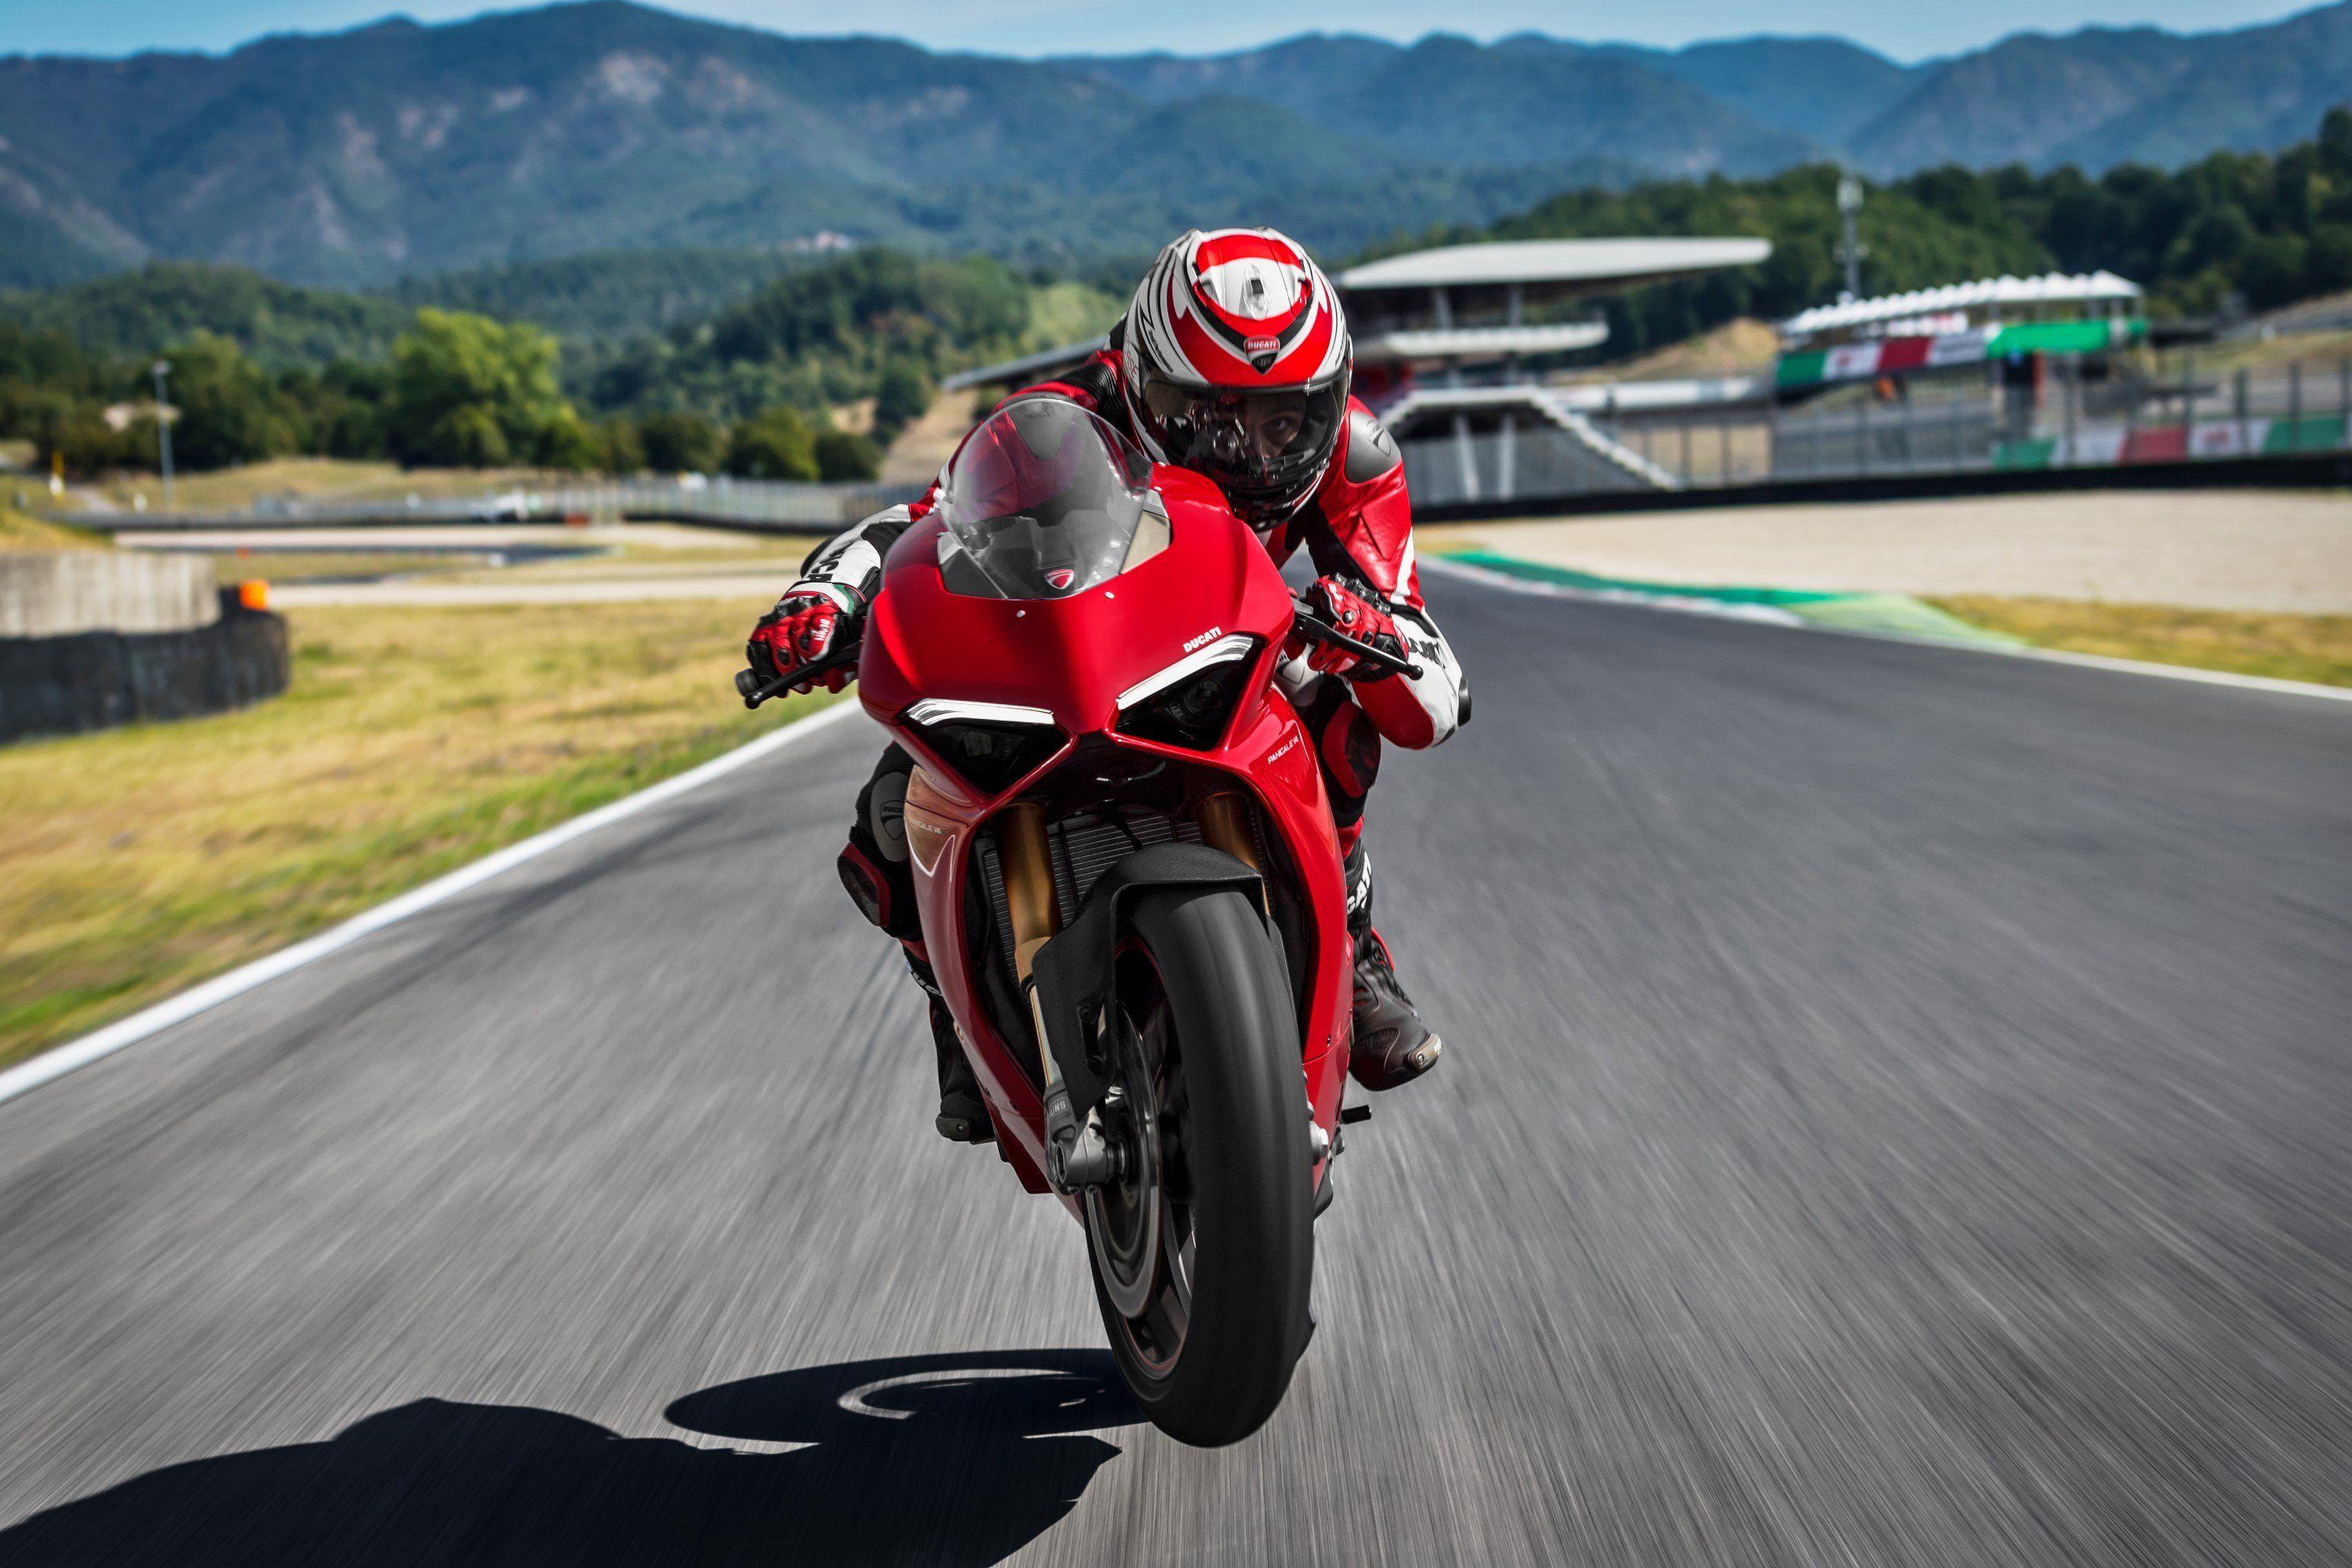 Download Ducati wallpapers for mobile phone free Ducati HD pictures